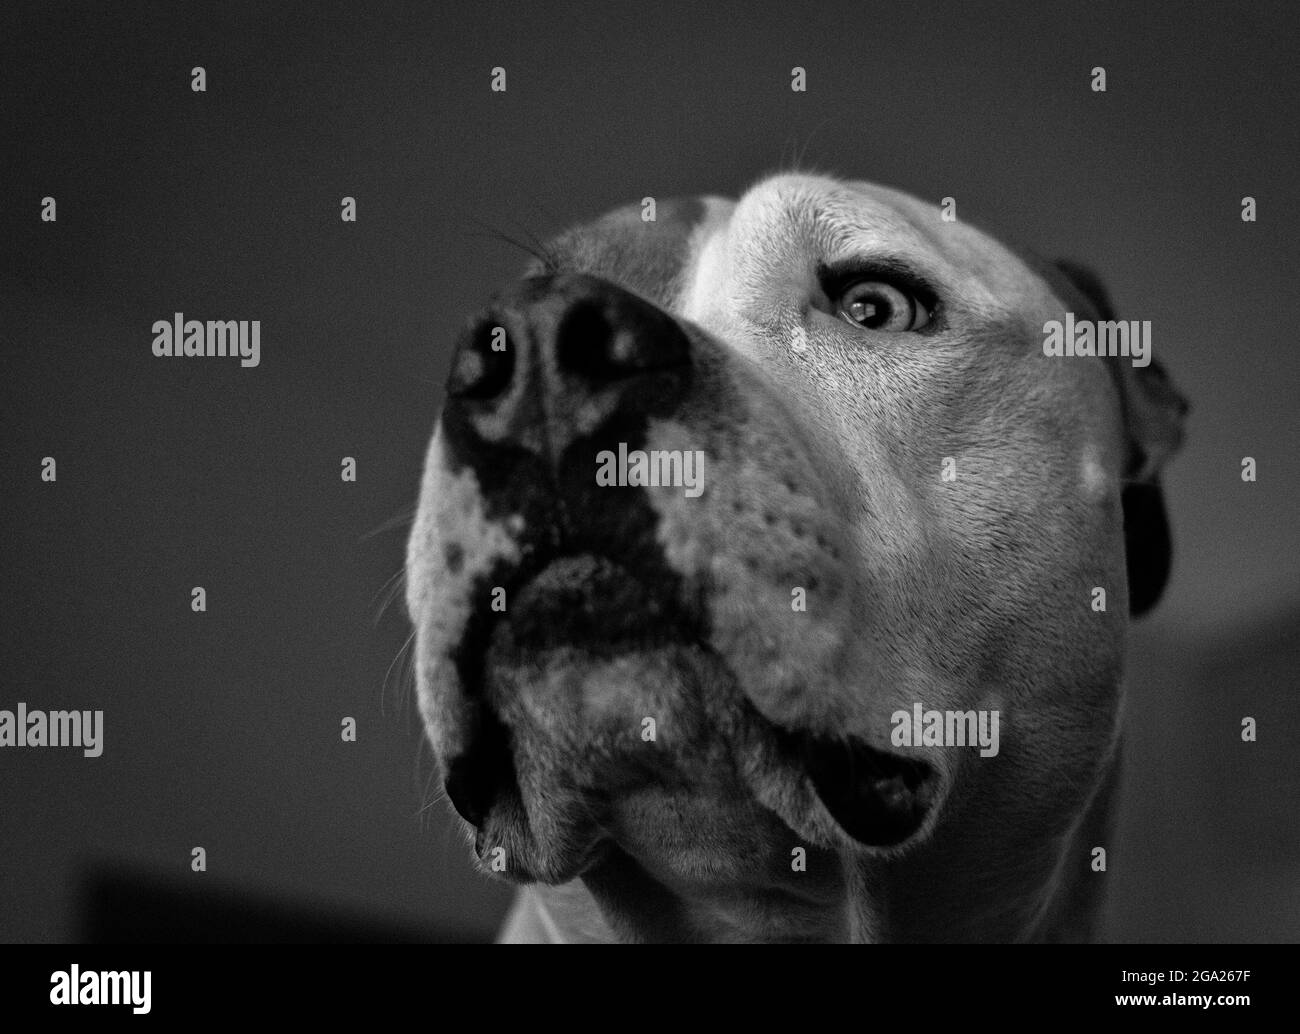 Close up of a mixed breed dog (American Staffordshire Pit Bull Terrier and American Pit Bull Terrier) (Canis lupus familiaris) looking concerned Stock Photo